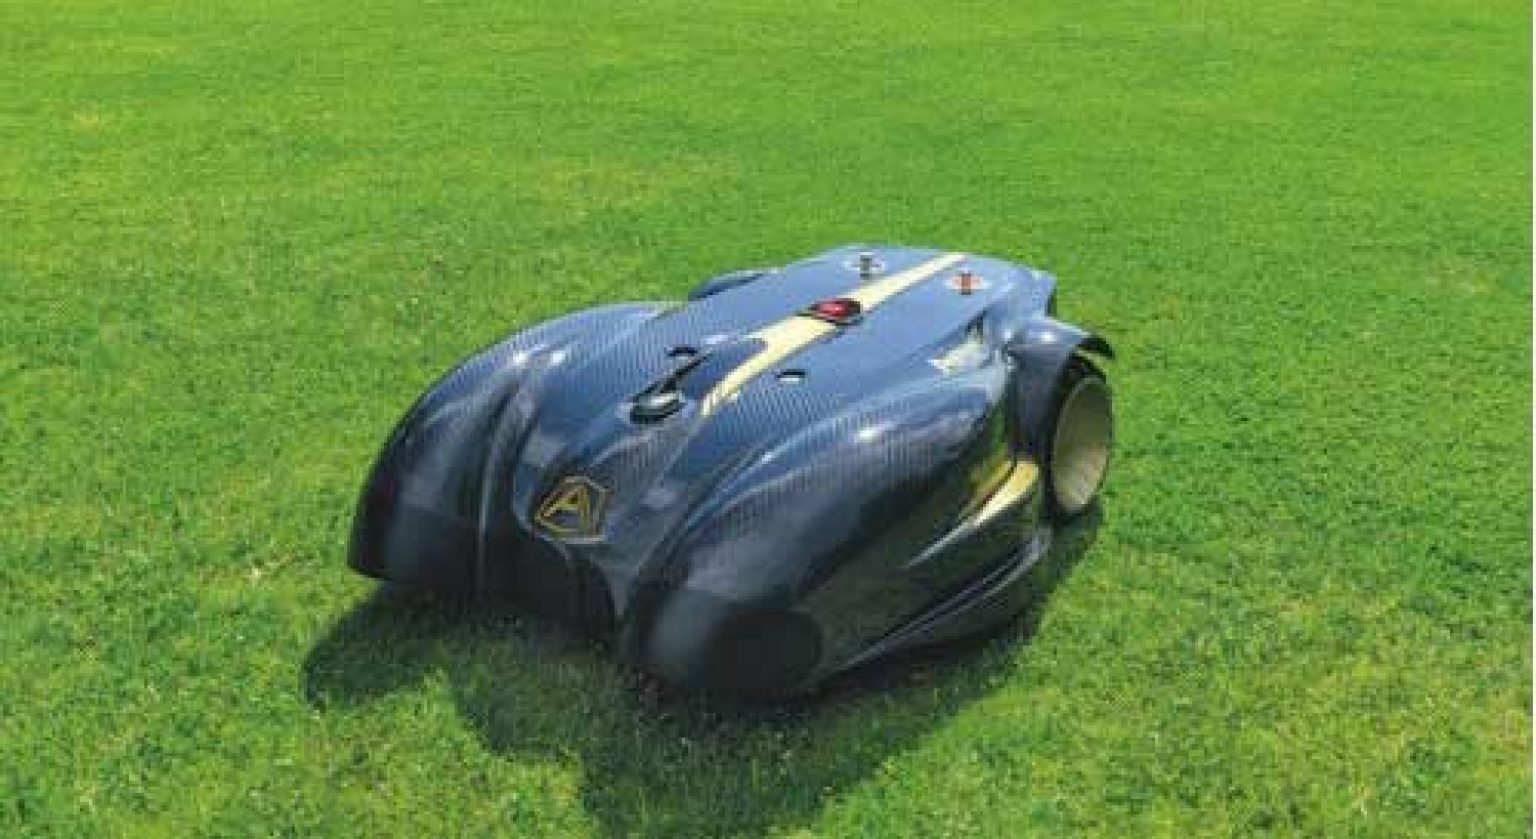 Best Robotic Lawn Mower Without Perimeter Wire Life Falcon